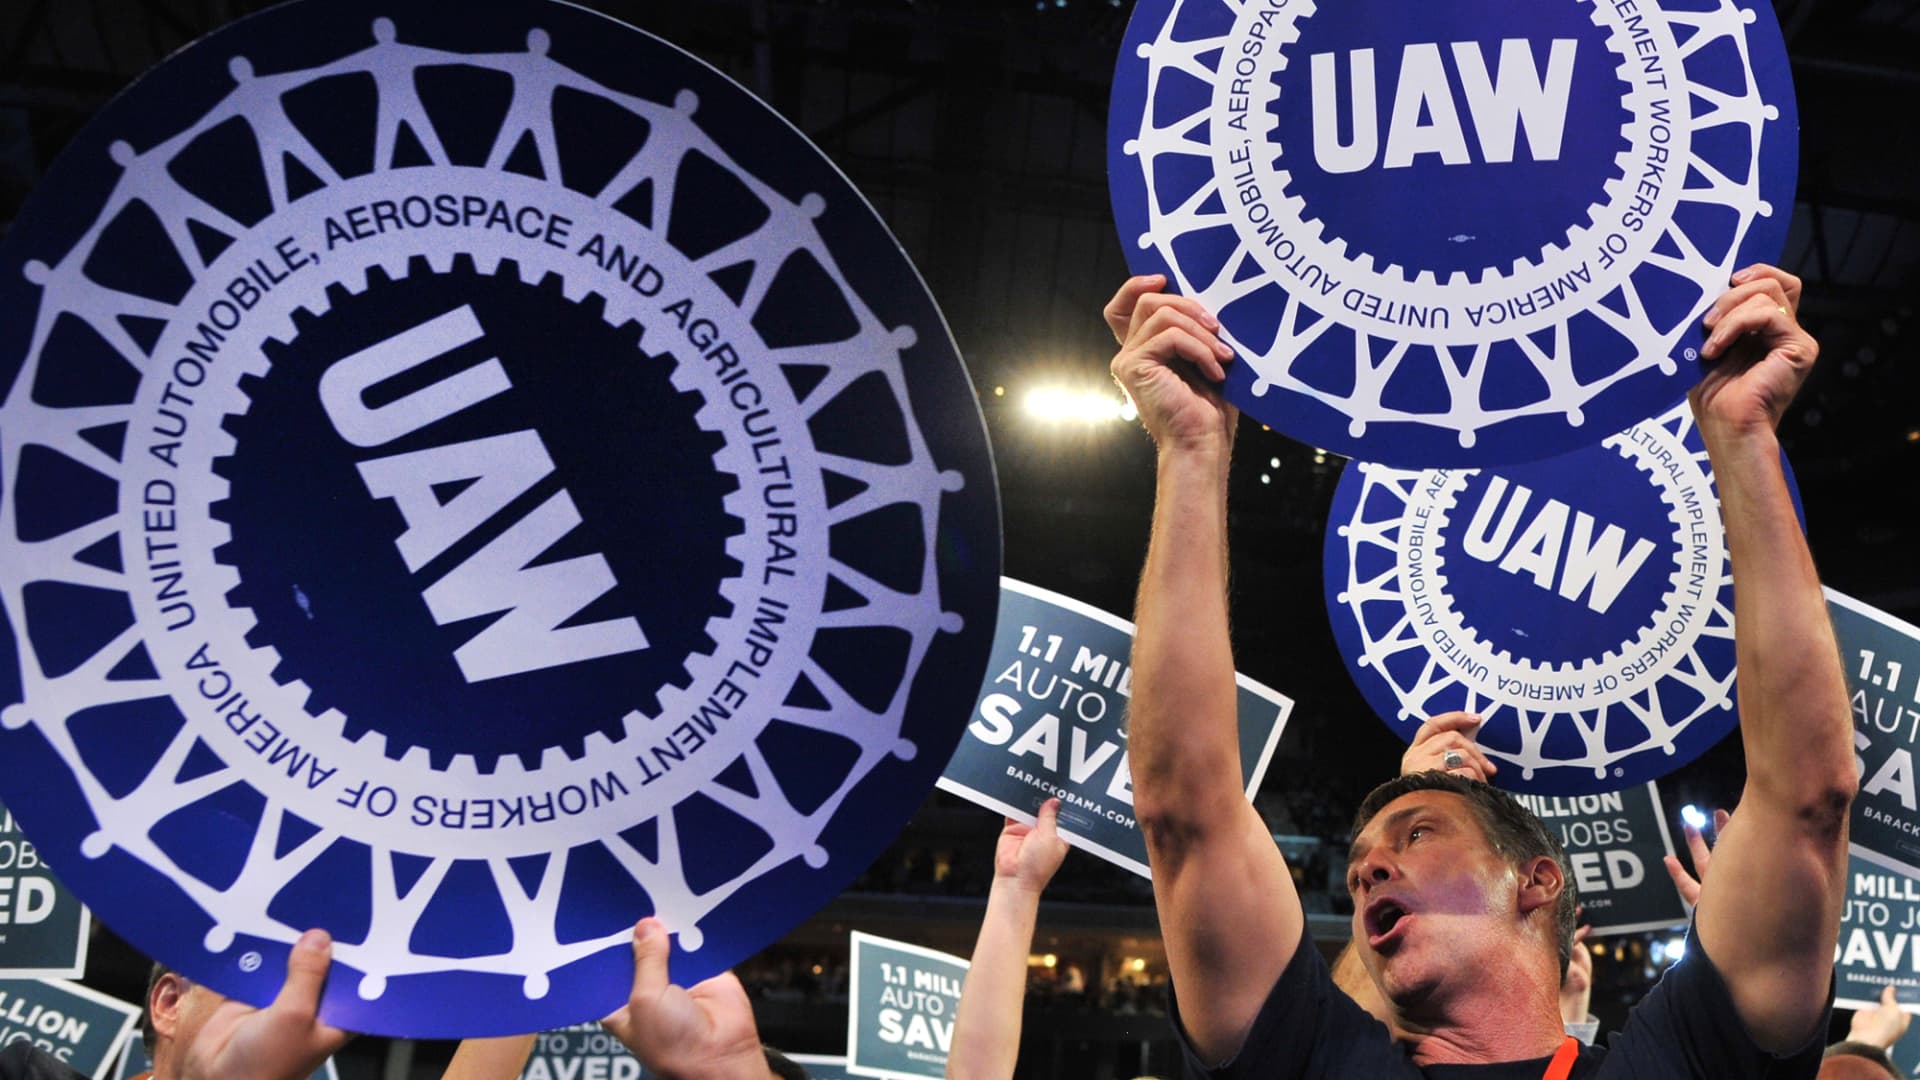 UAW members elect reform president, ousting incumbent, ahead of crucial auto negotiations